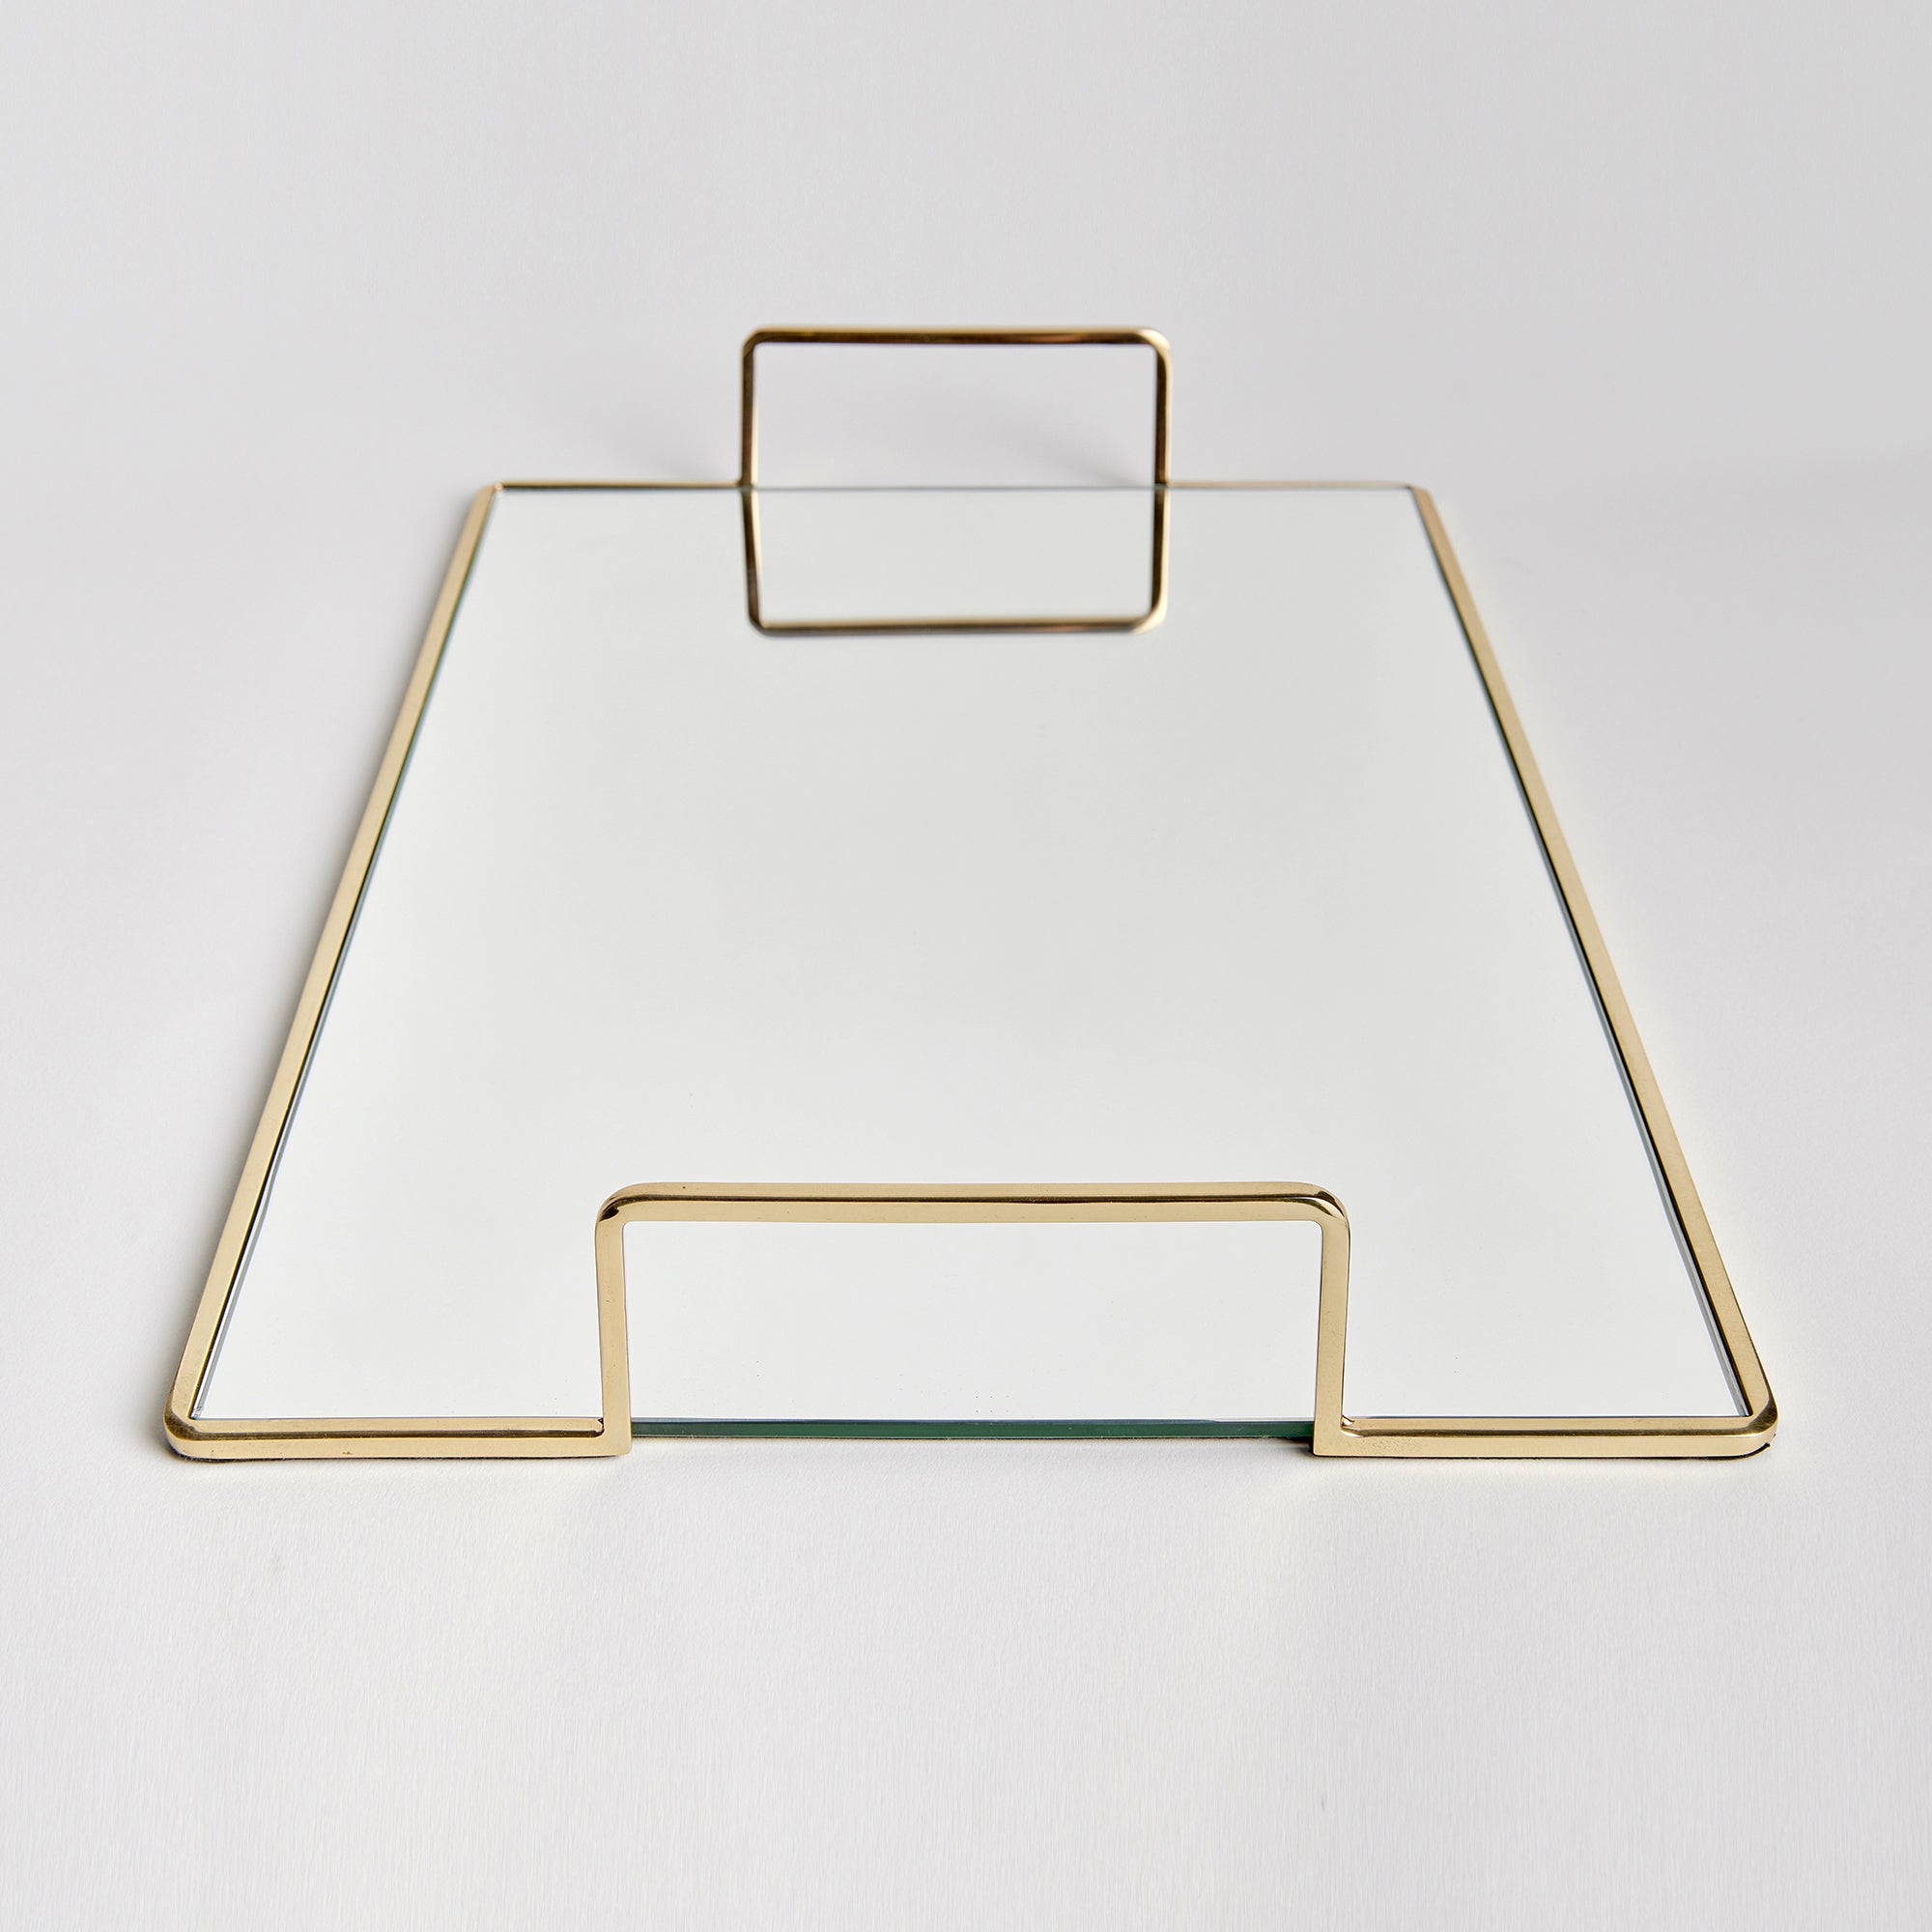 Smooth and streamlined, this mirrored tray is a clean and modern accent. Add to ottoman, side table or even the kitchen counter for a sleek look. Amethyst Home provides interior design, new construction, custom furniture, and area rugs in the Omaha metro area.